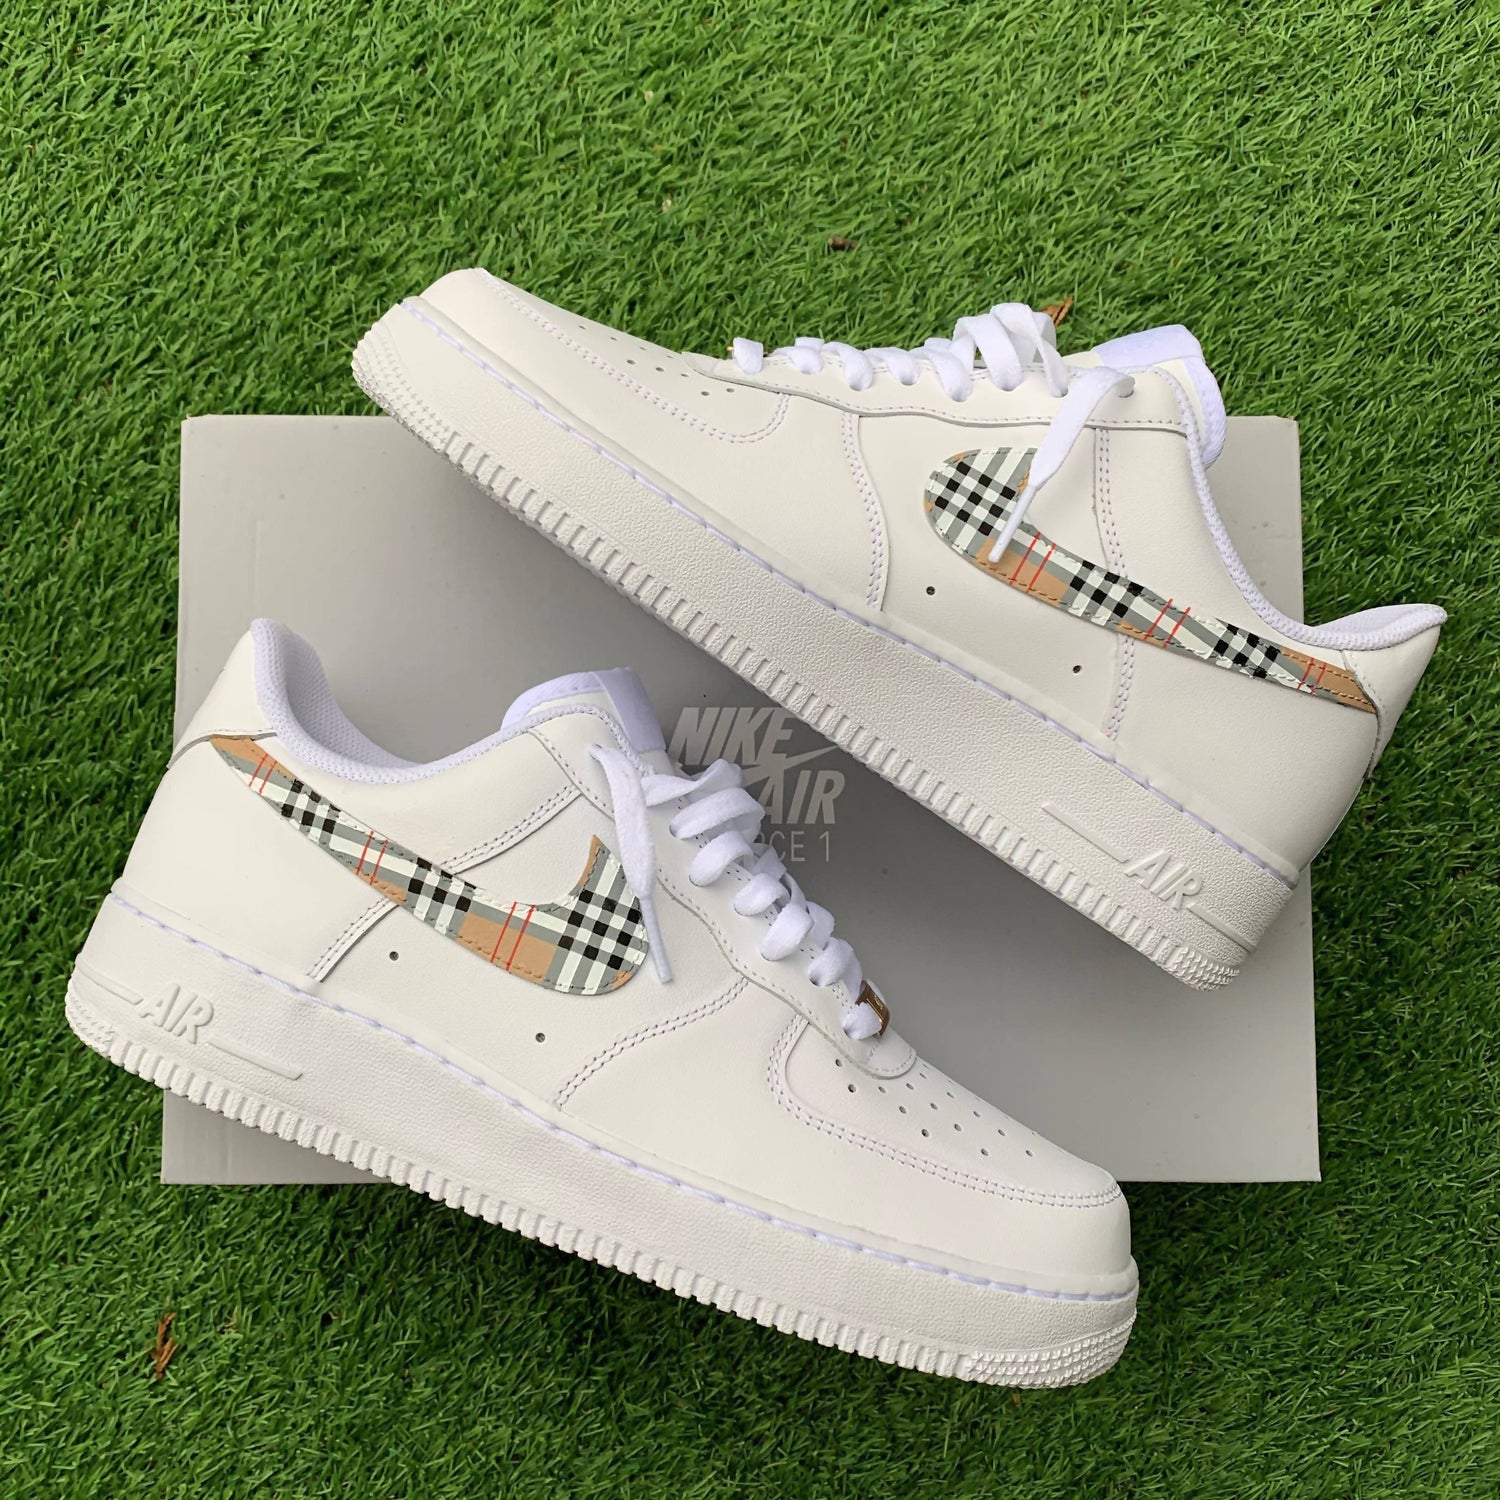 'Burberry' Air Force 1